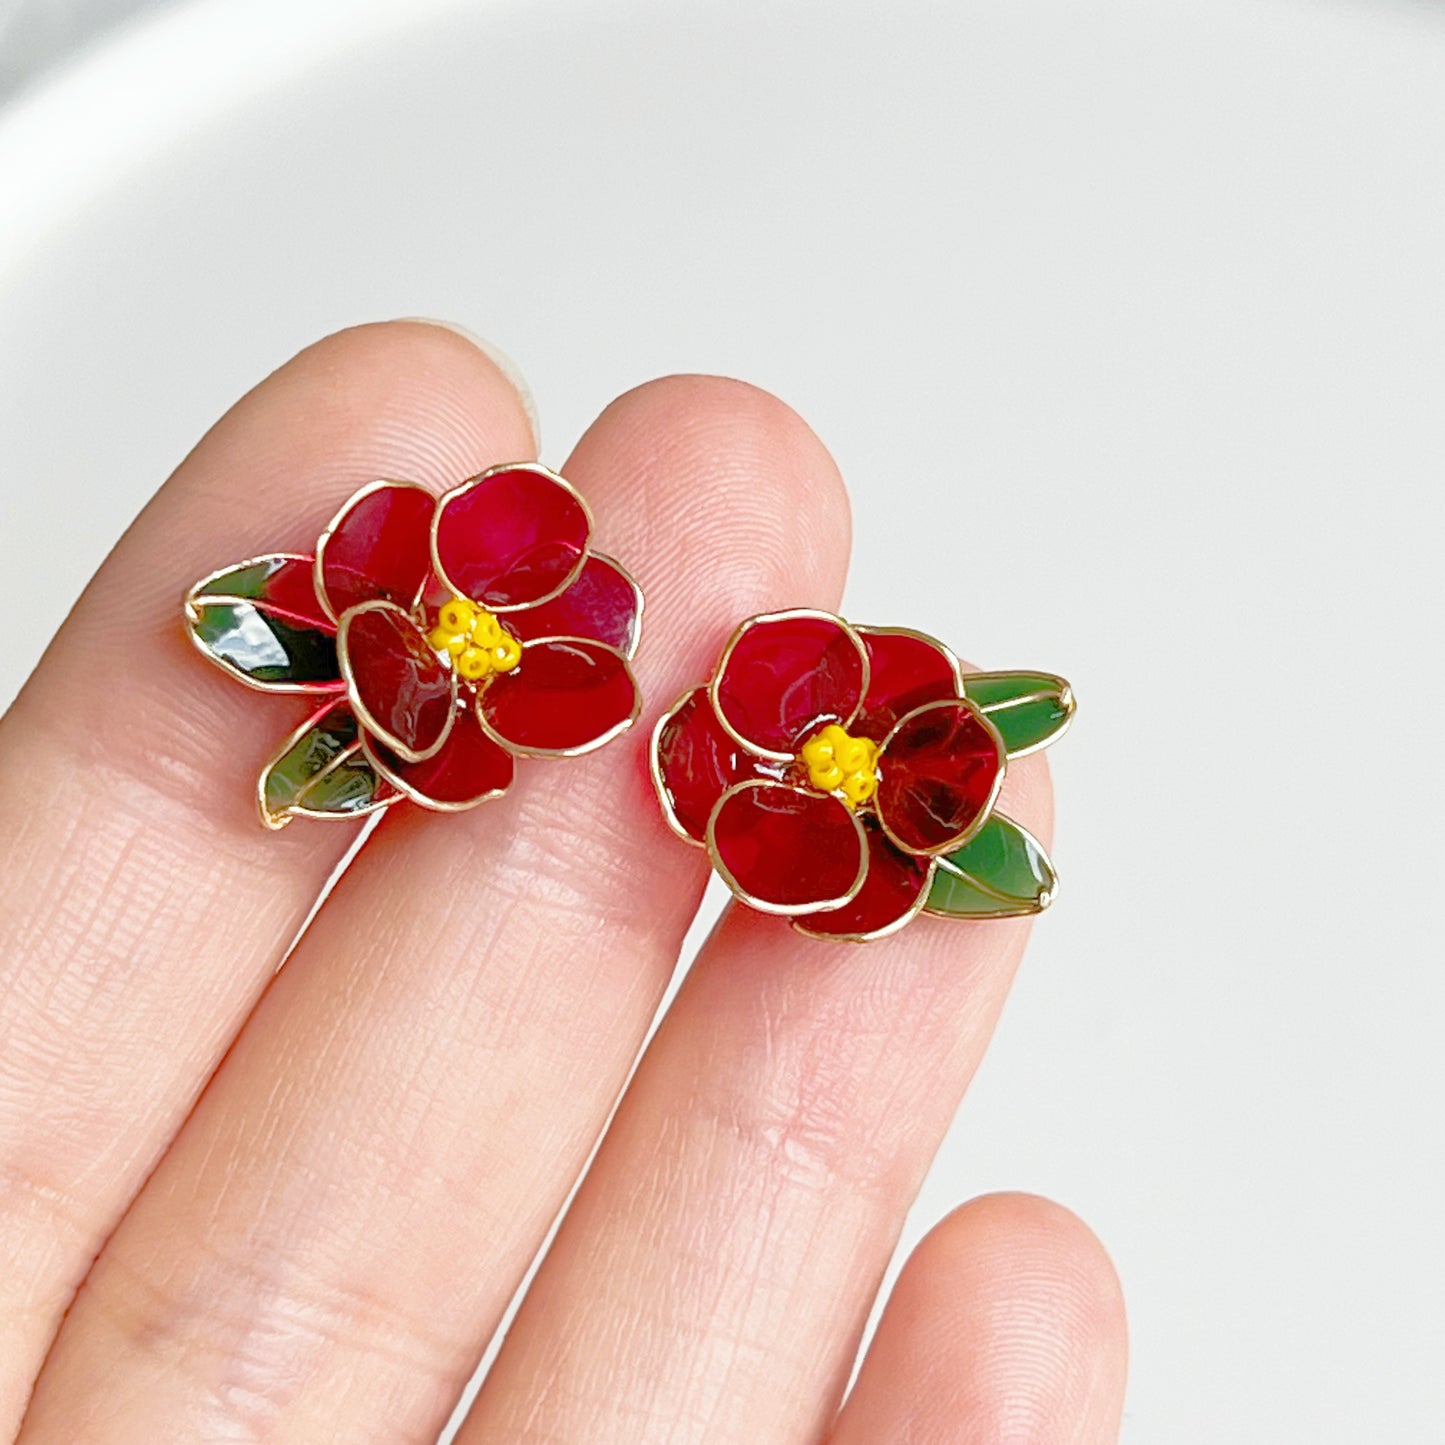 Handmade Red Wild Camellia Flower and Leaves Earrings-Ninaouity